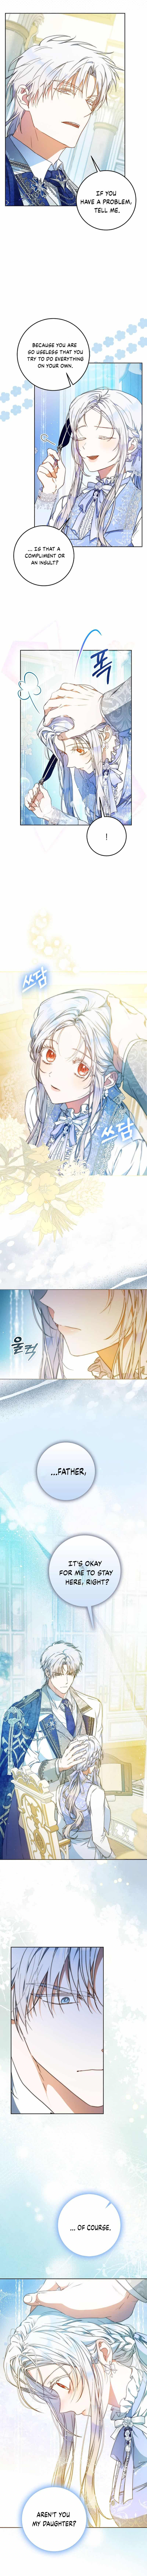 Read manga I Became the Wife of the Male Lead online